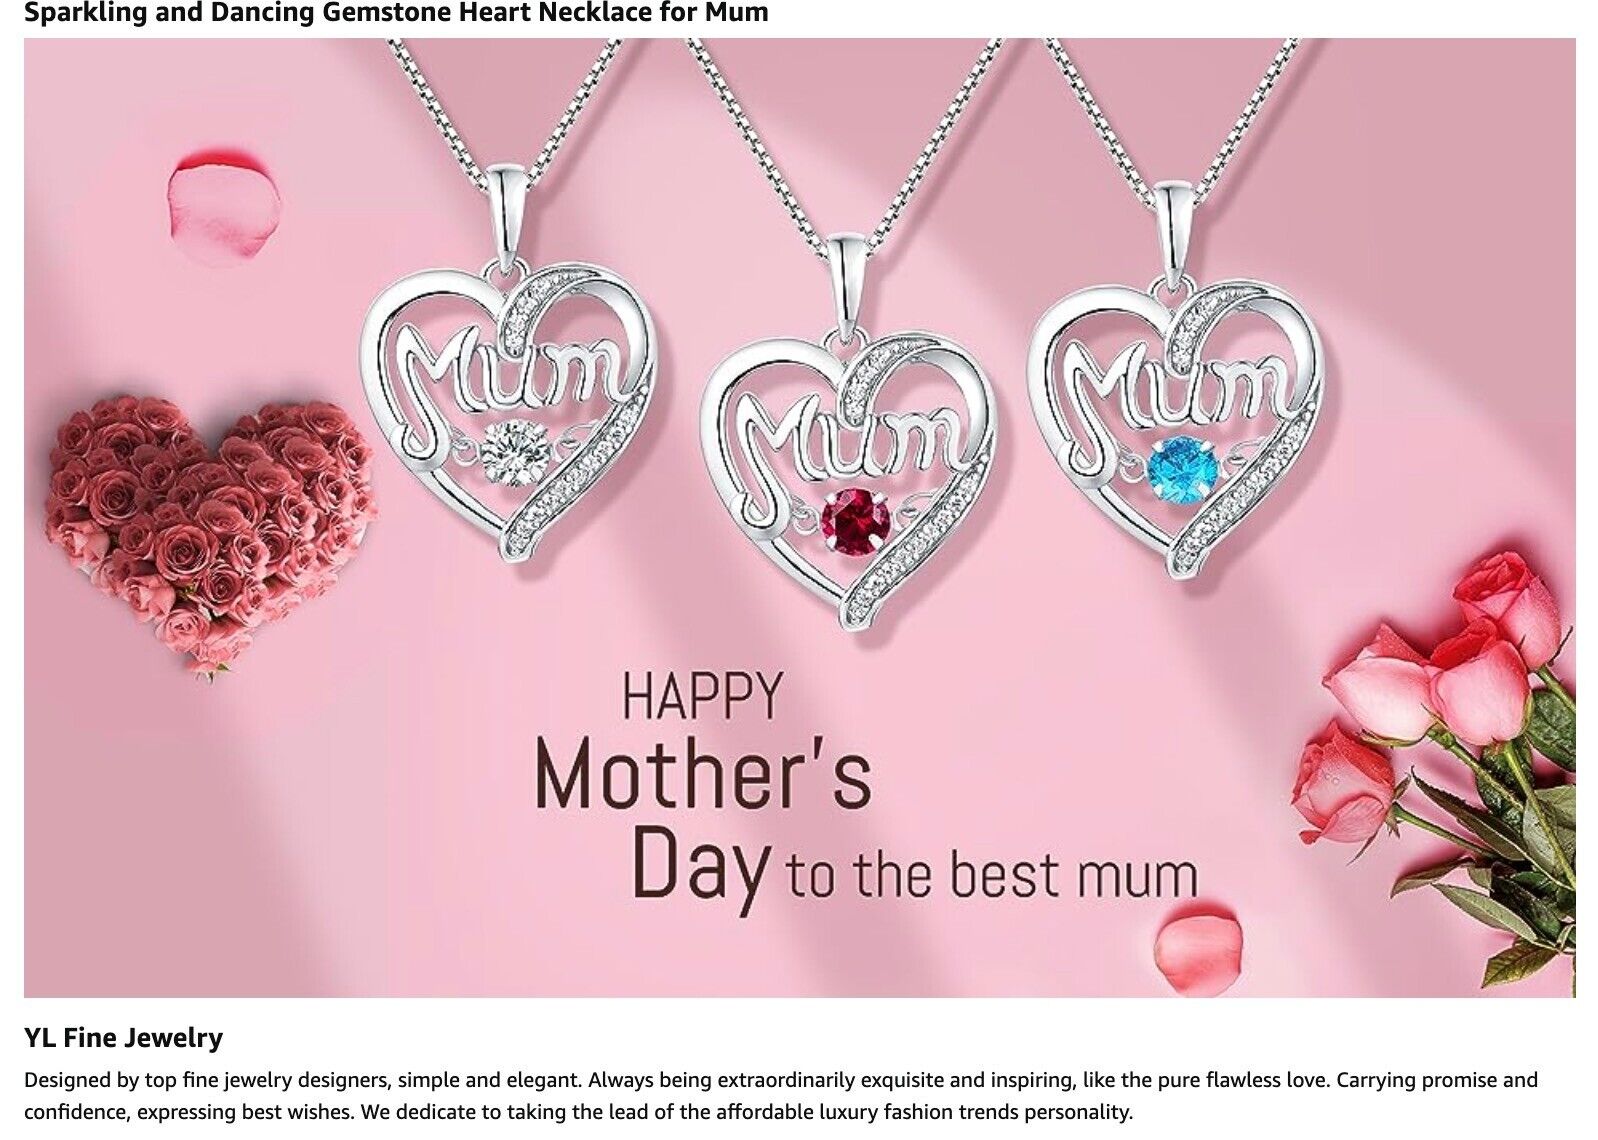 YL Mum Heart Necklace 925 Sterling Silver Mom Hold Child's Hand cut January  Birthstone Garnet Pendant Gifts for Mum Women : Amazon.co.uk: Fashion